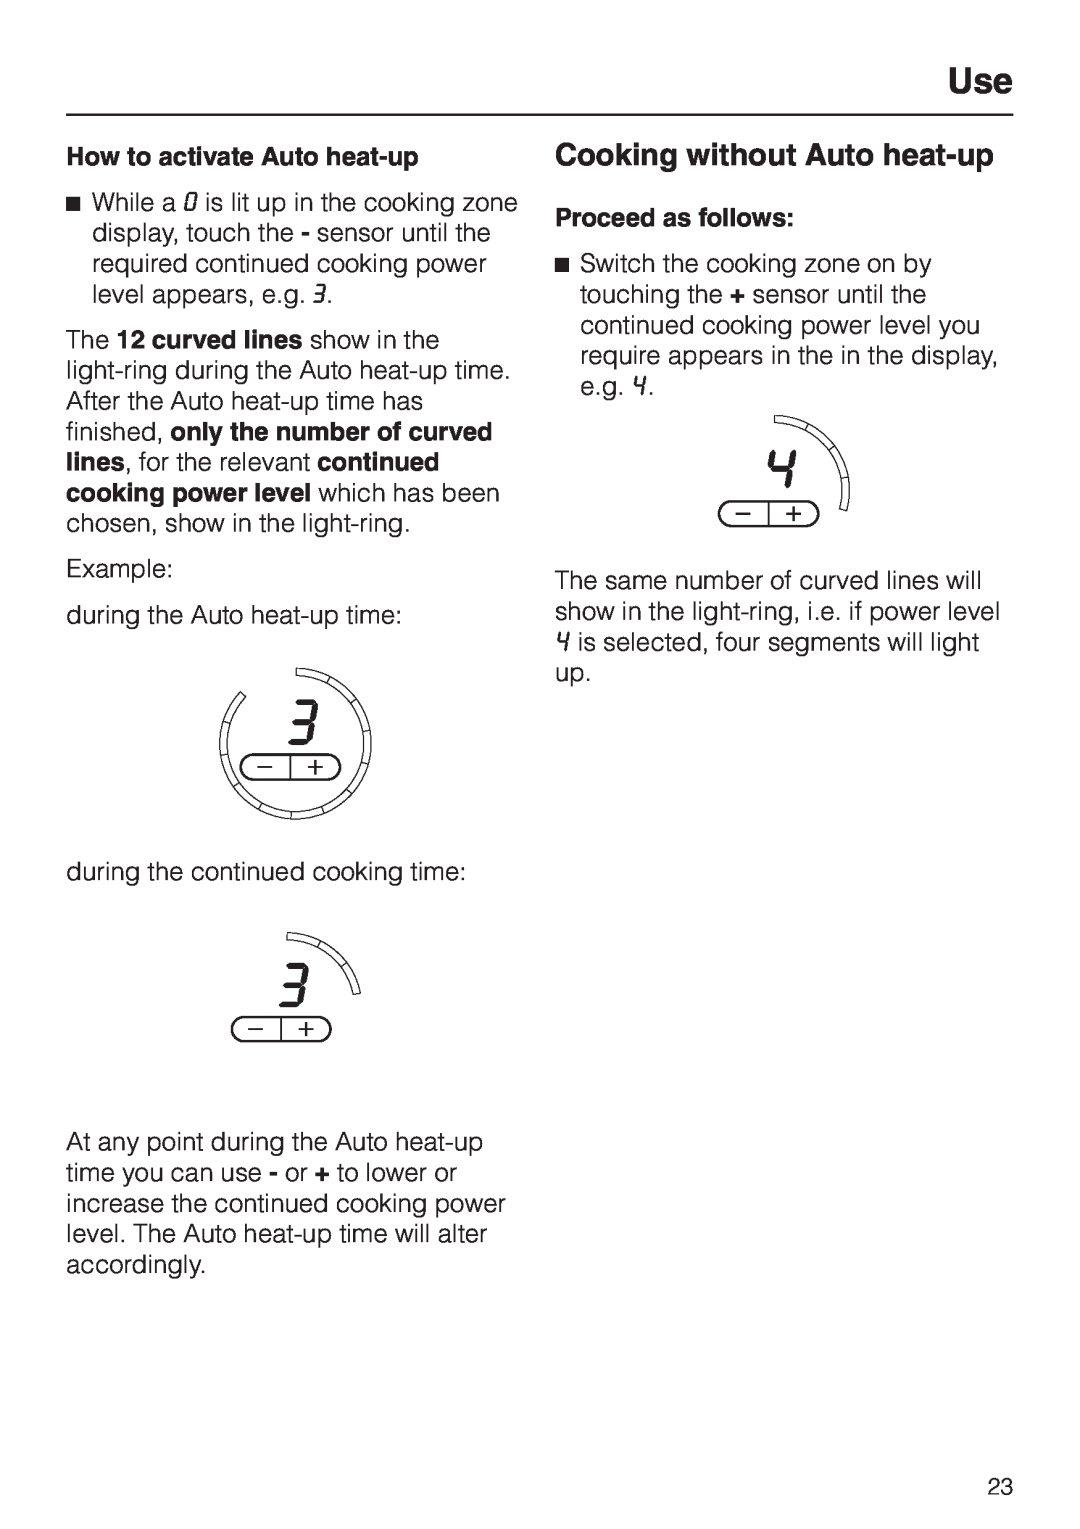 Miele KM5773 installation instructions Cooking without Auto heat-up, How to activate Auto heat-up, Proceed as follows 